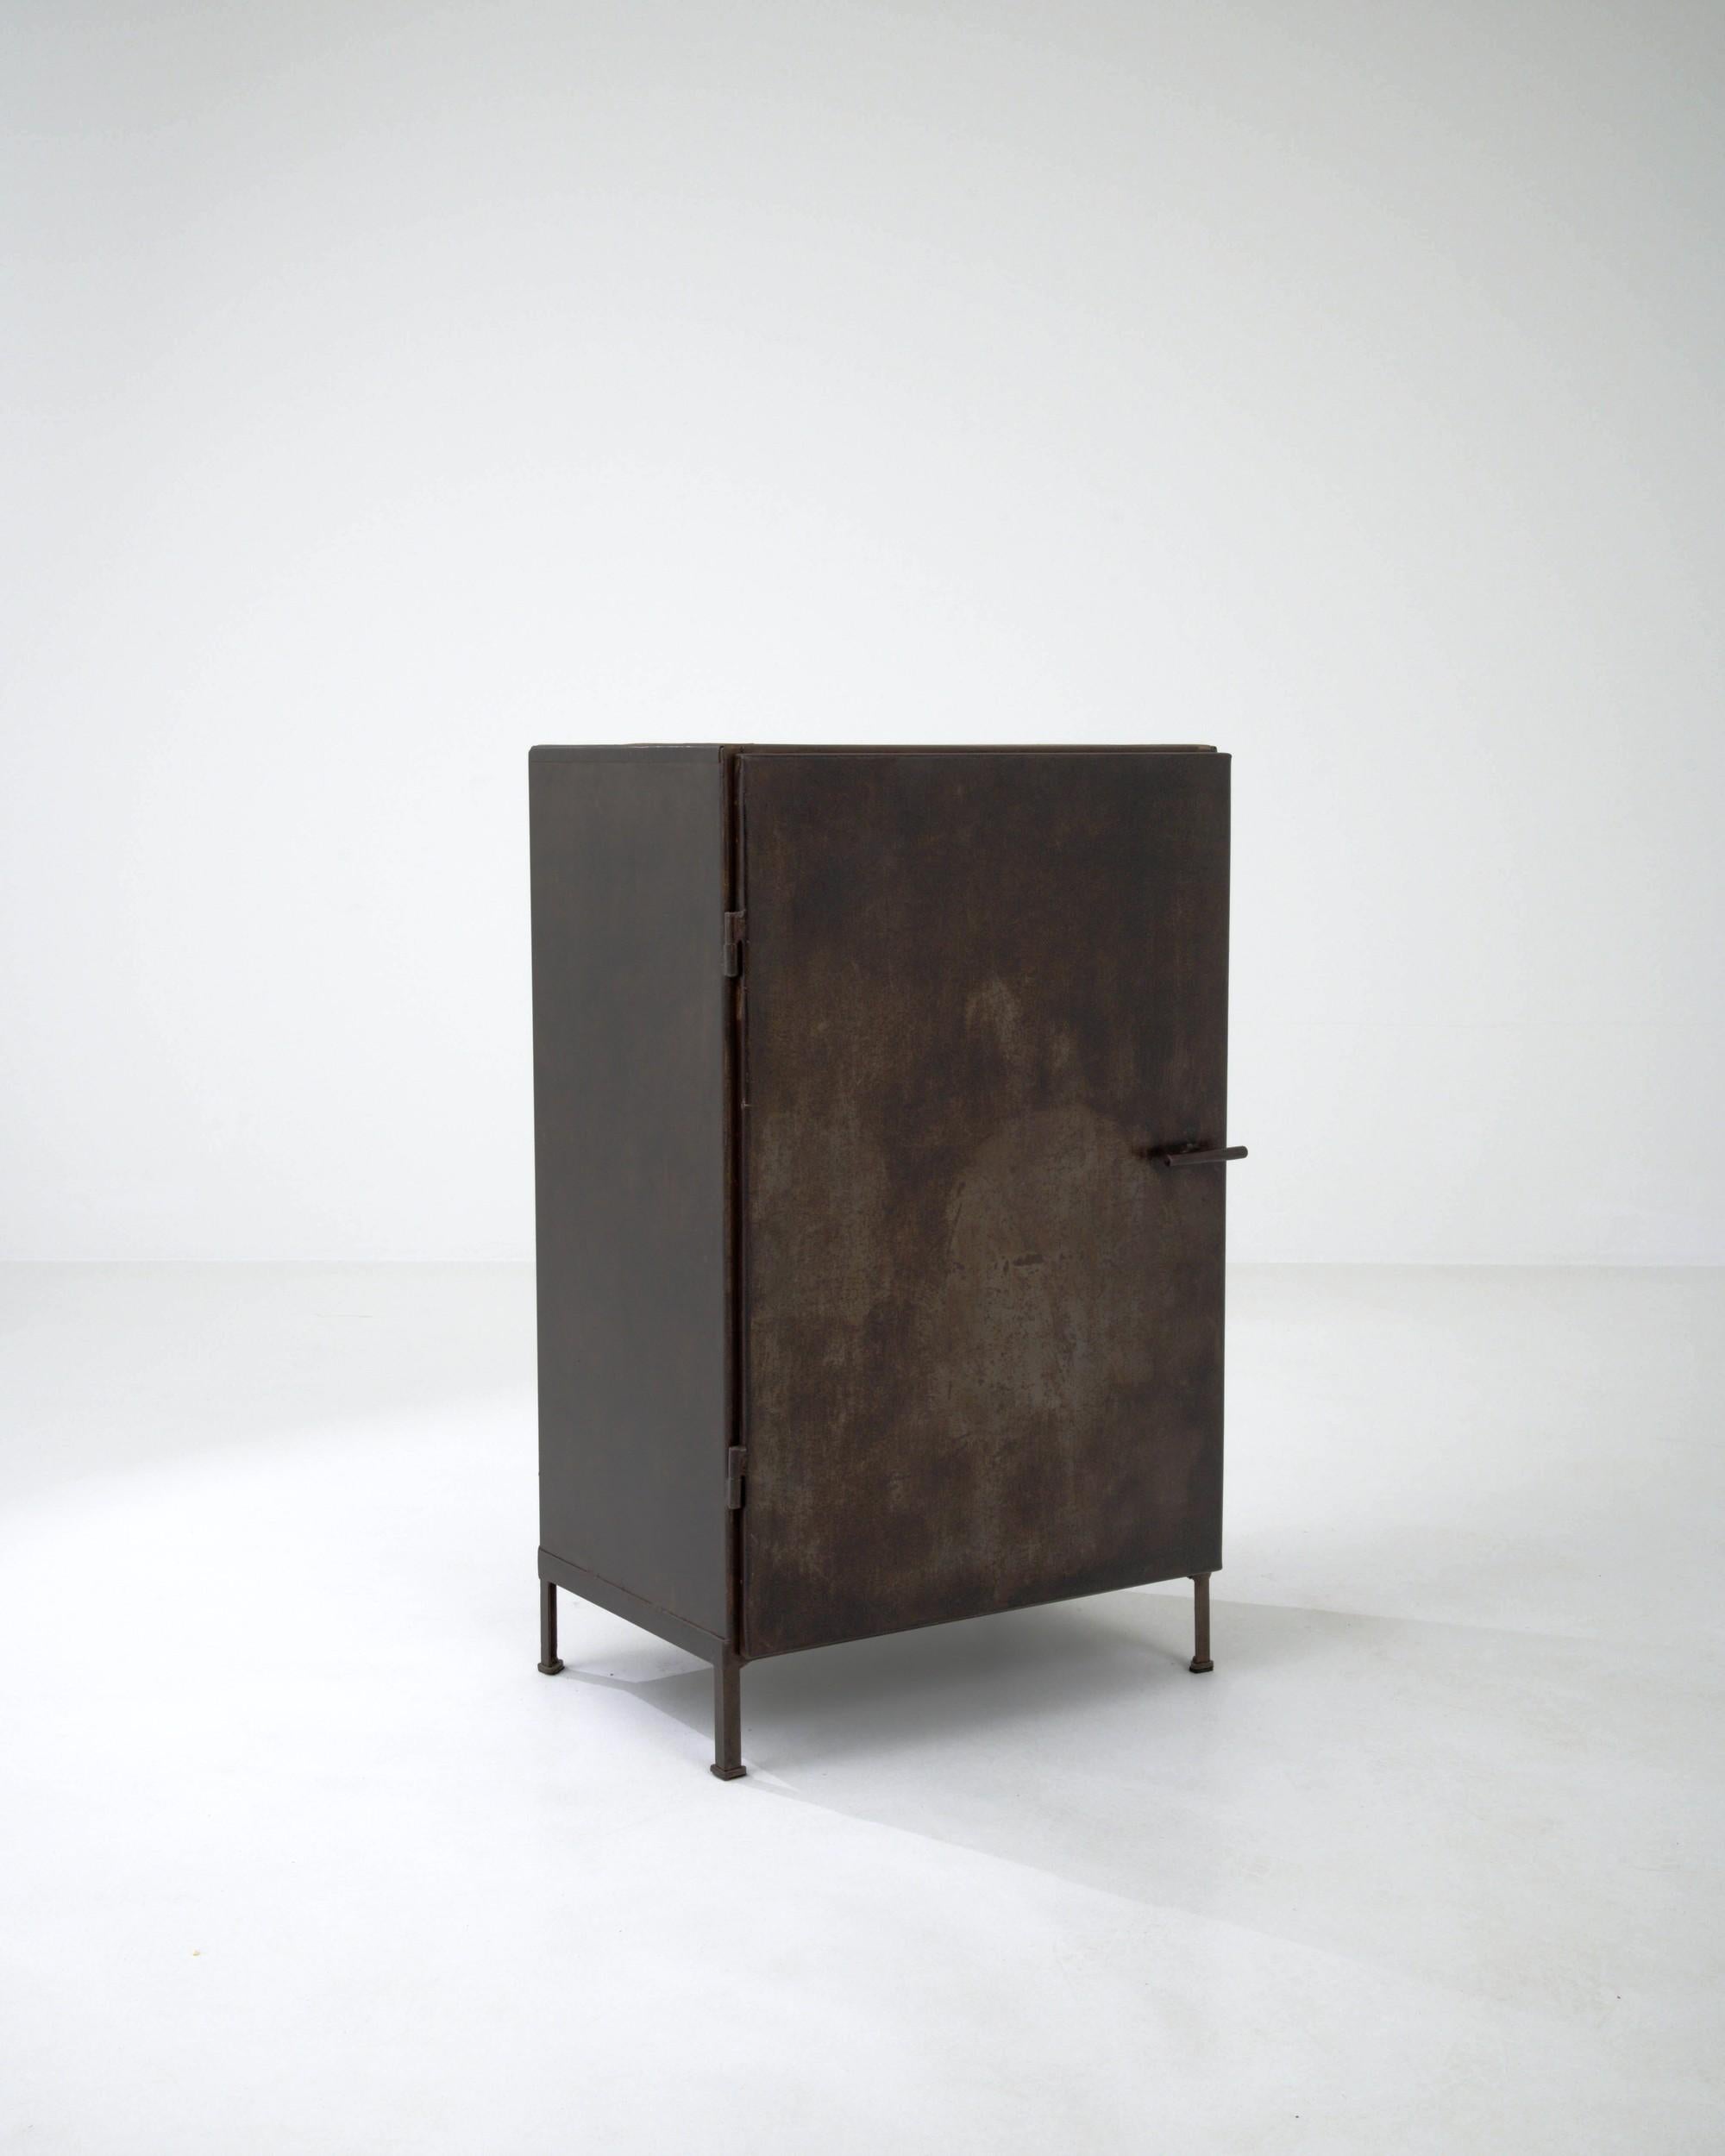 The minimalist shape and rich patina of this vintage metal cabinet make for a striking Industrial find. Made in France in the early 20th century, the design possesses a rational simplicity: clean corners and a bold refusal of ornamentation create a